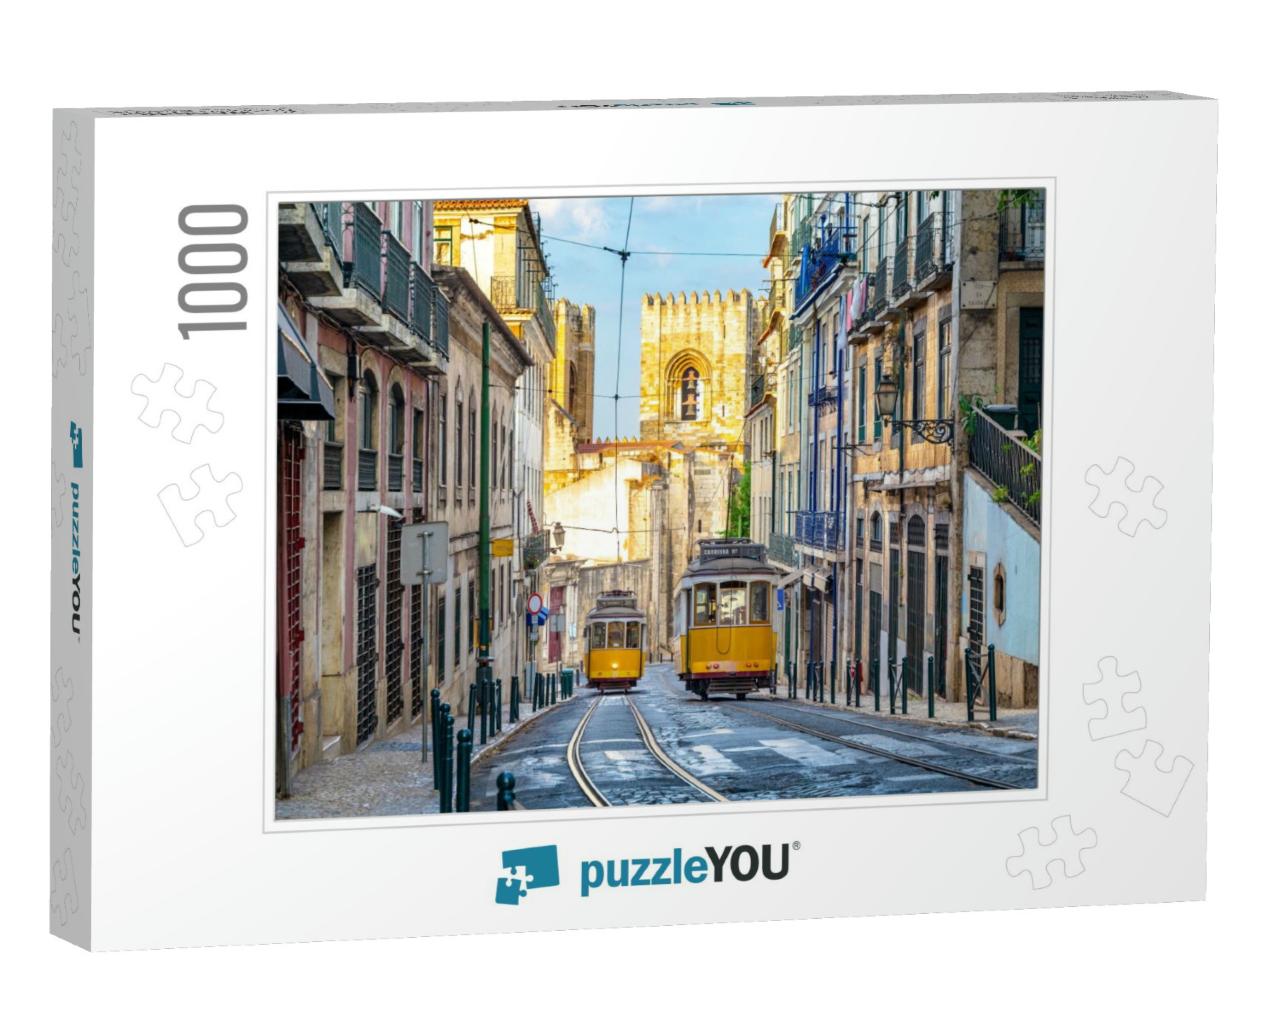 Tram on Line 28 in Lisbon, Portugal... Jigsaw Puzzle with 1000 pieces